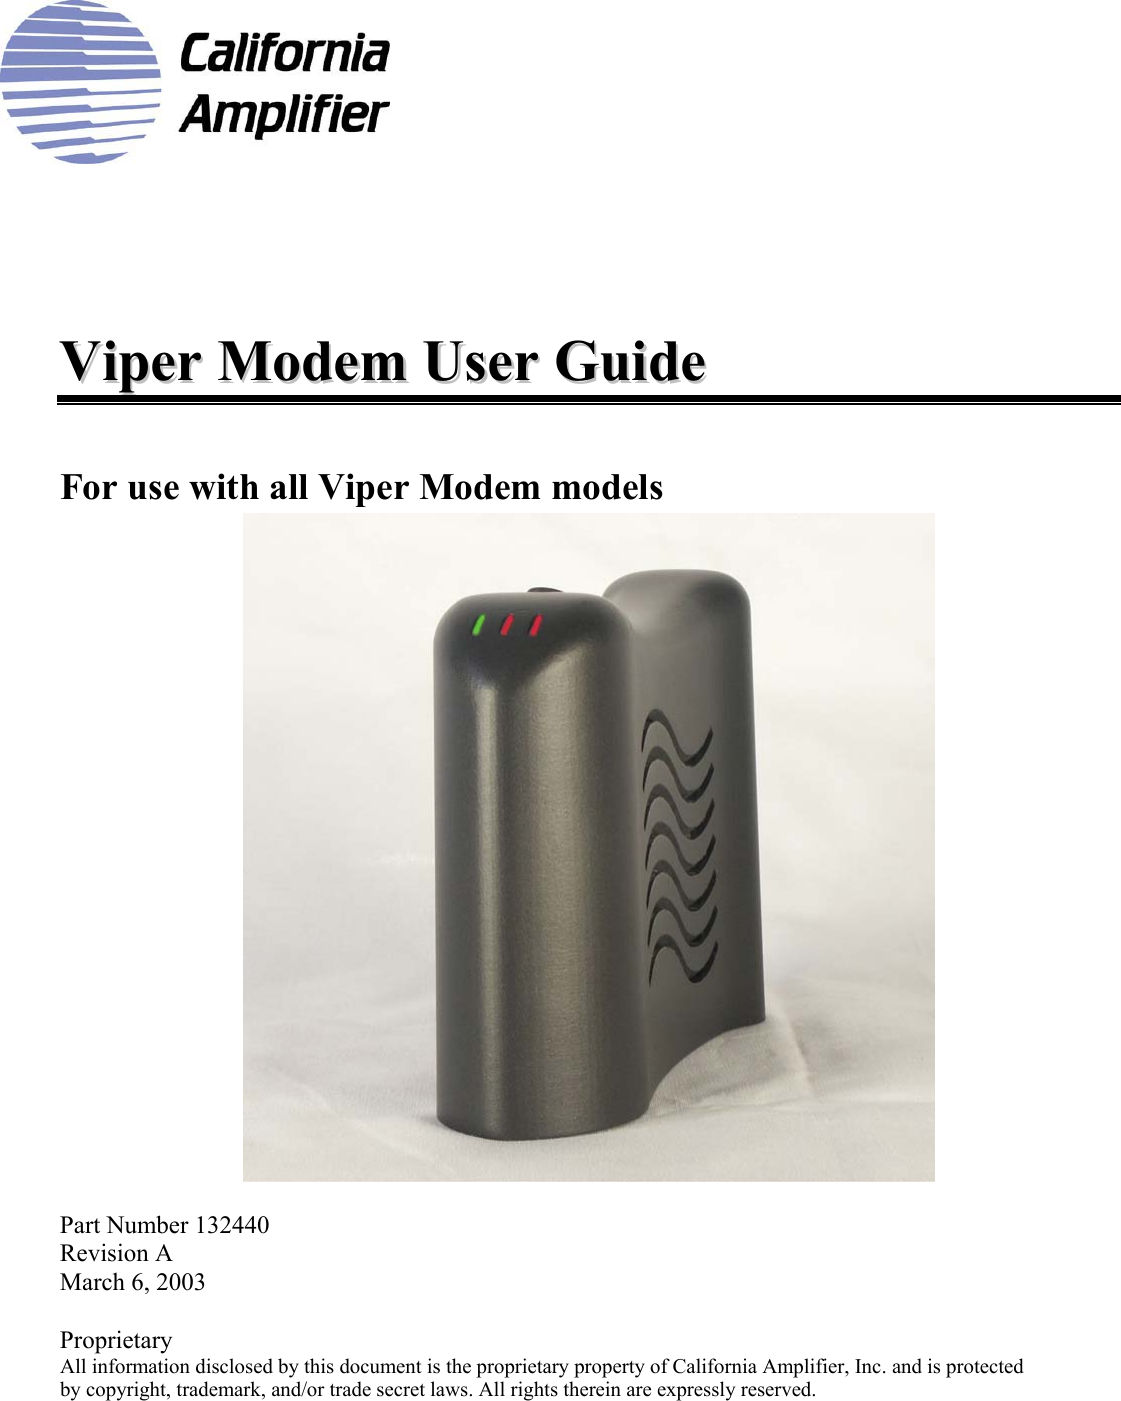        VViippeerr  MMooddeemm  UUsseerr  GGuuiiddee    For use with all Viper Modem models   Part Number 132440 Revision A March 6, 2003  Proprietary All information disclosed by this document is the proprietary property of California Amplifier, Inc. and is protected  by copyright, trademark, and/or trade secret laws. All rights therein are expressly reserved.  